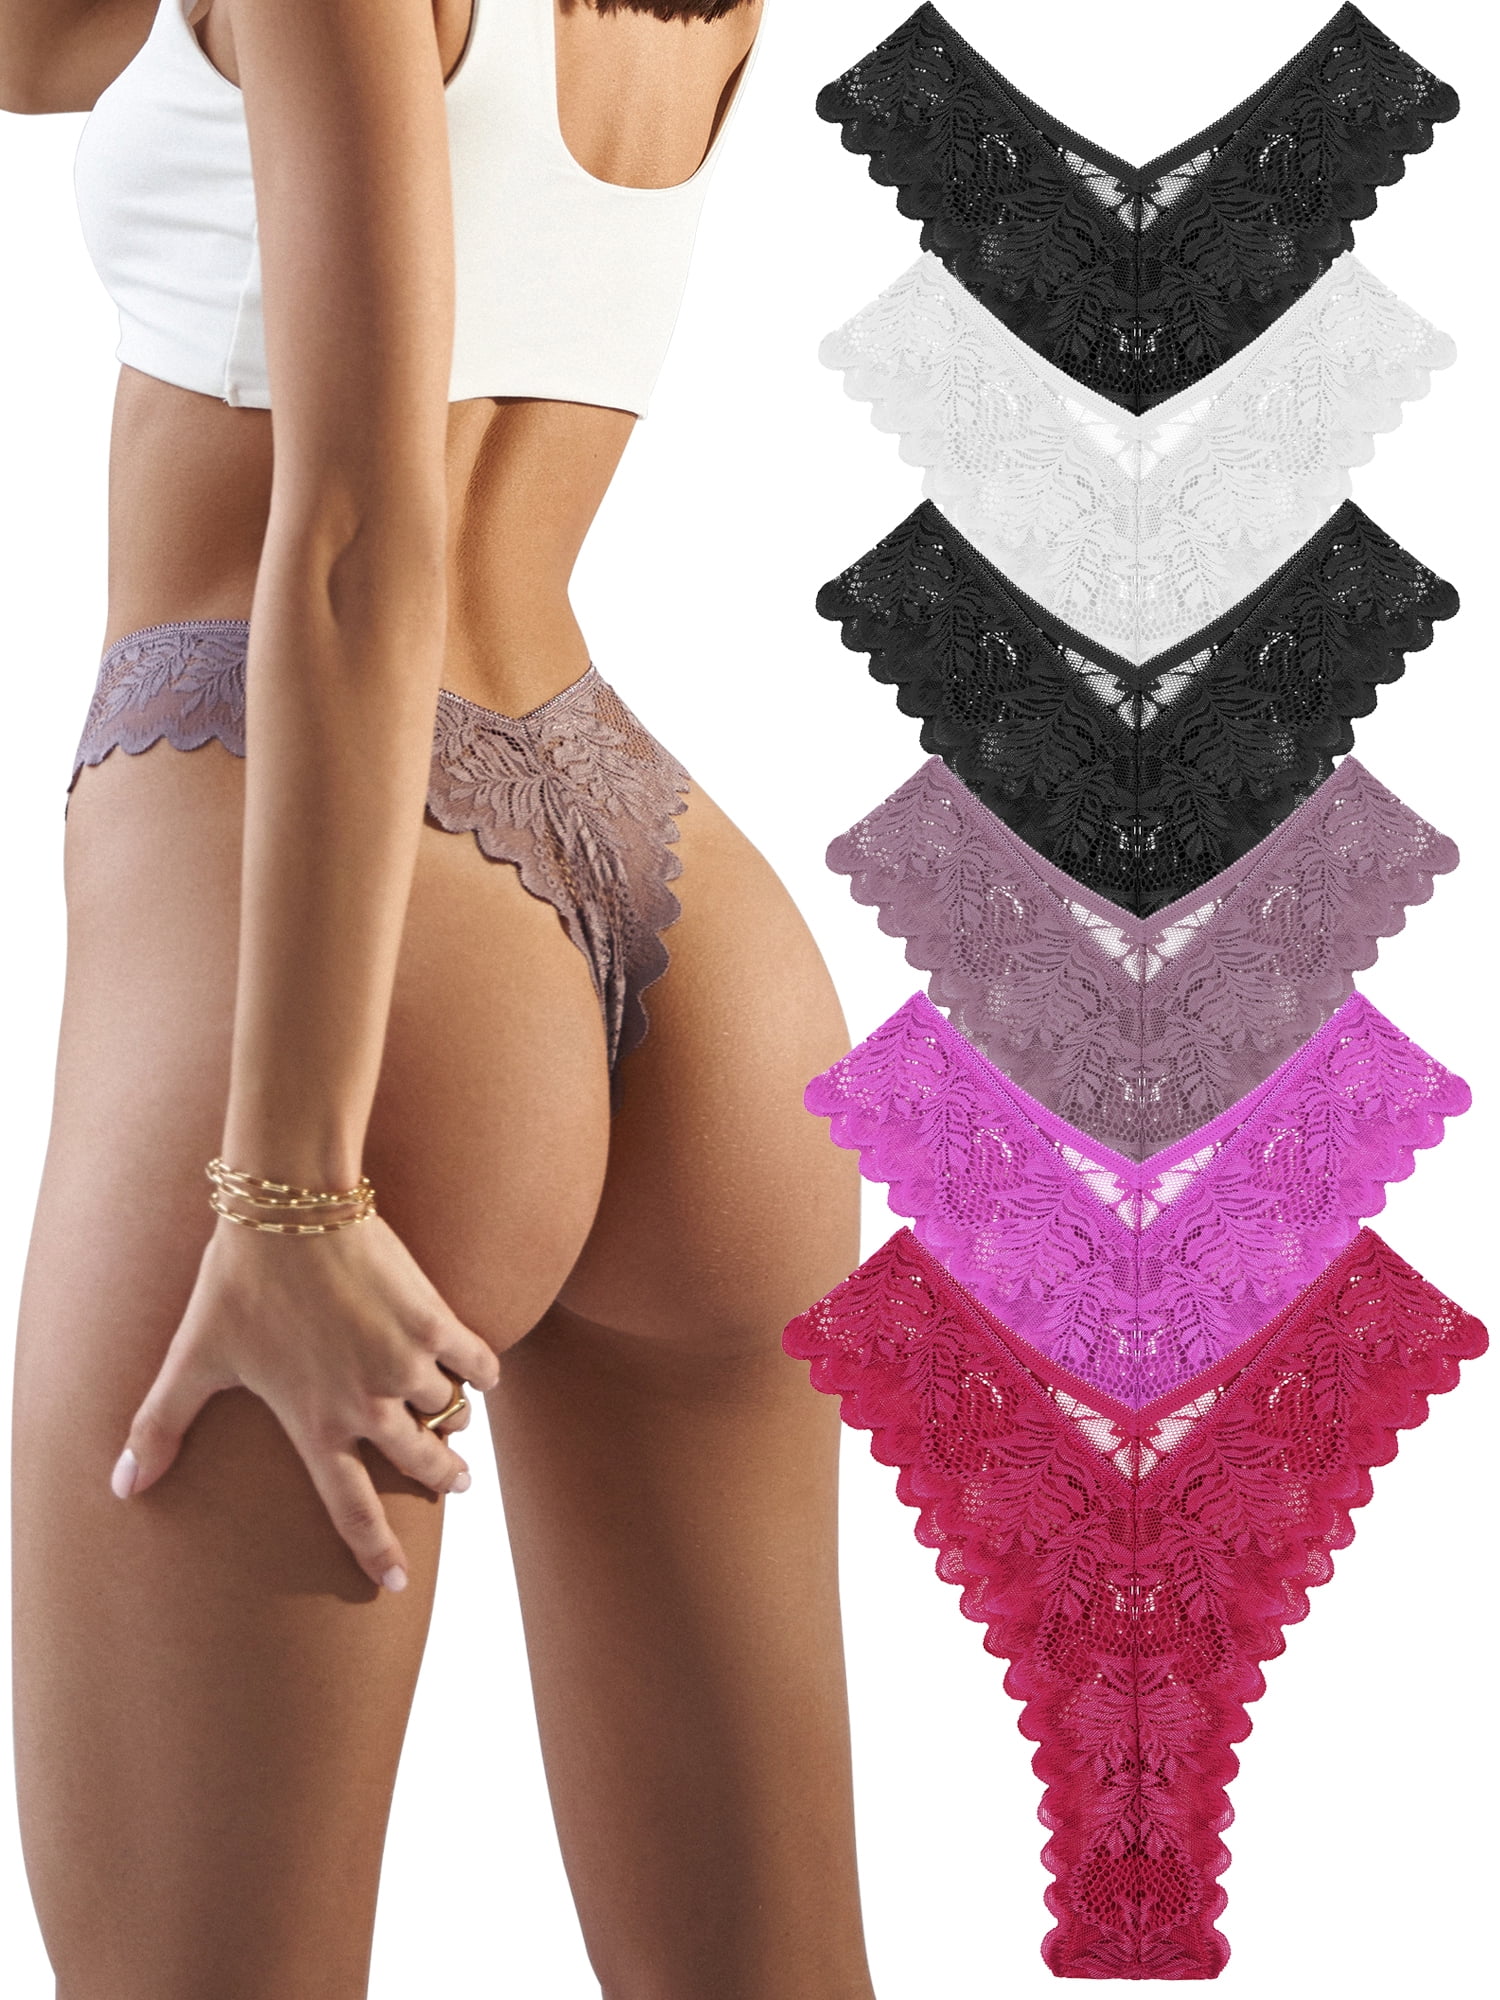 FINETOO 6 Pack Lace Underwear For Women Invisible High Waist